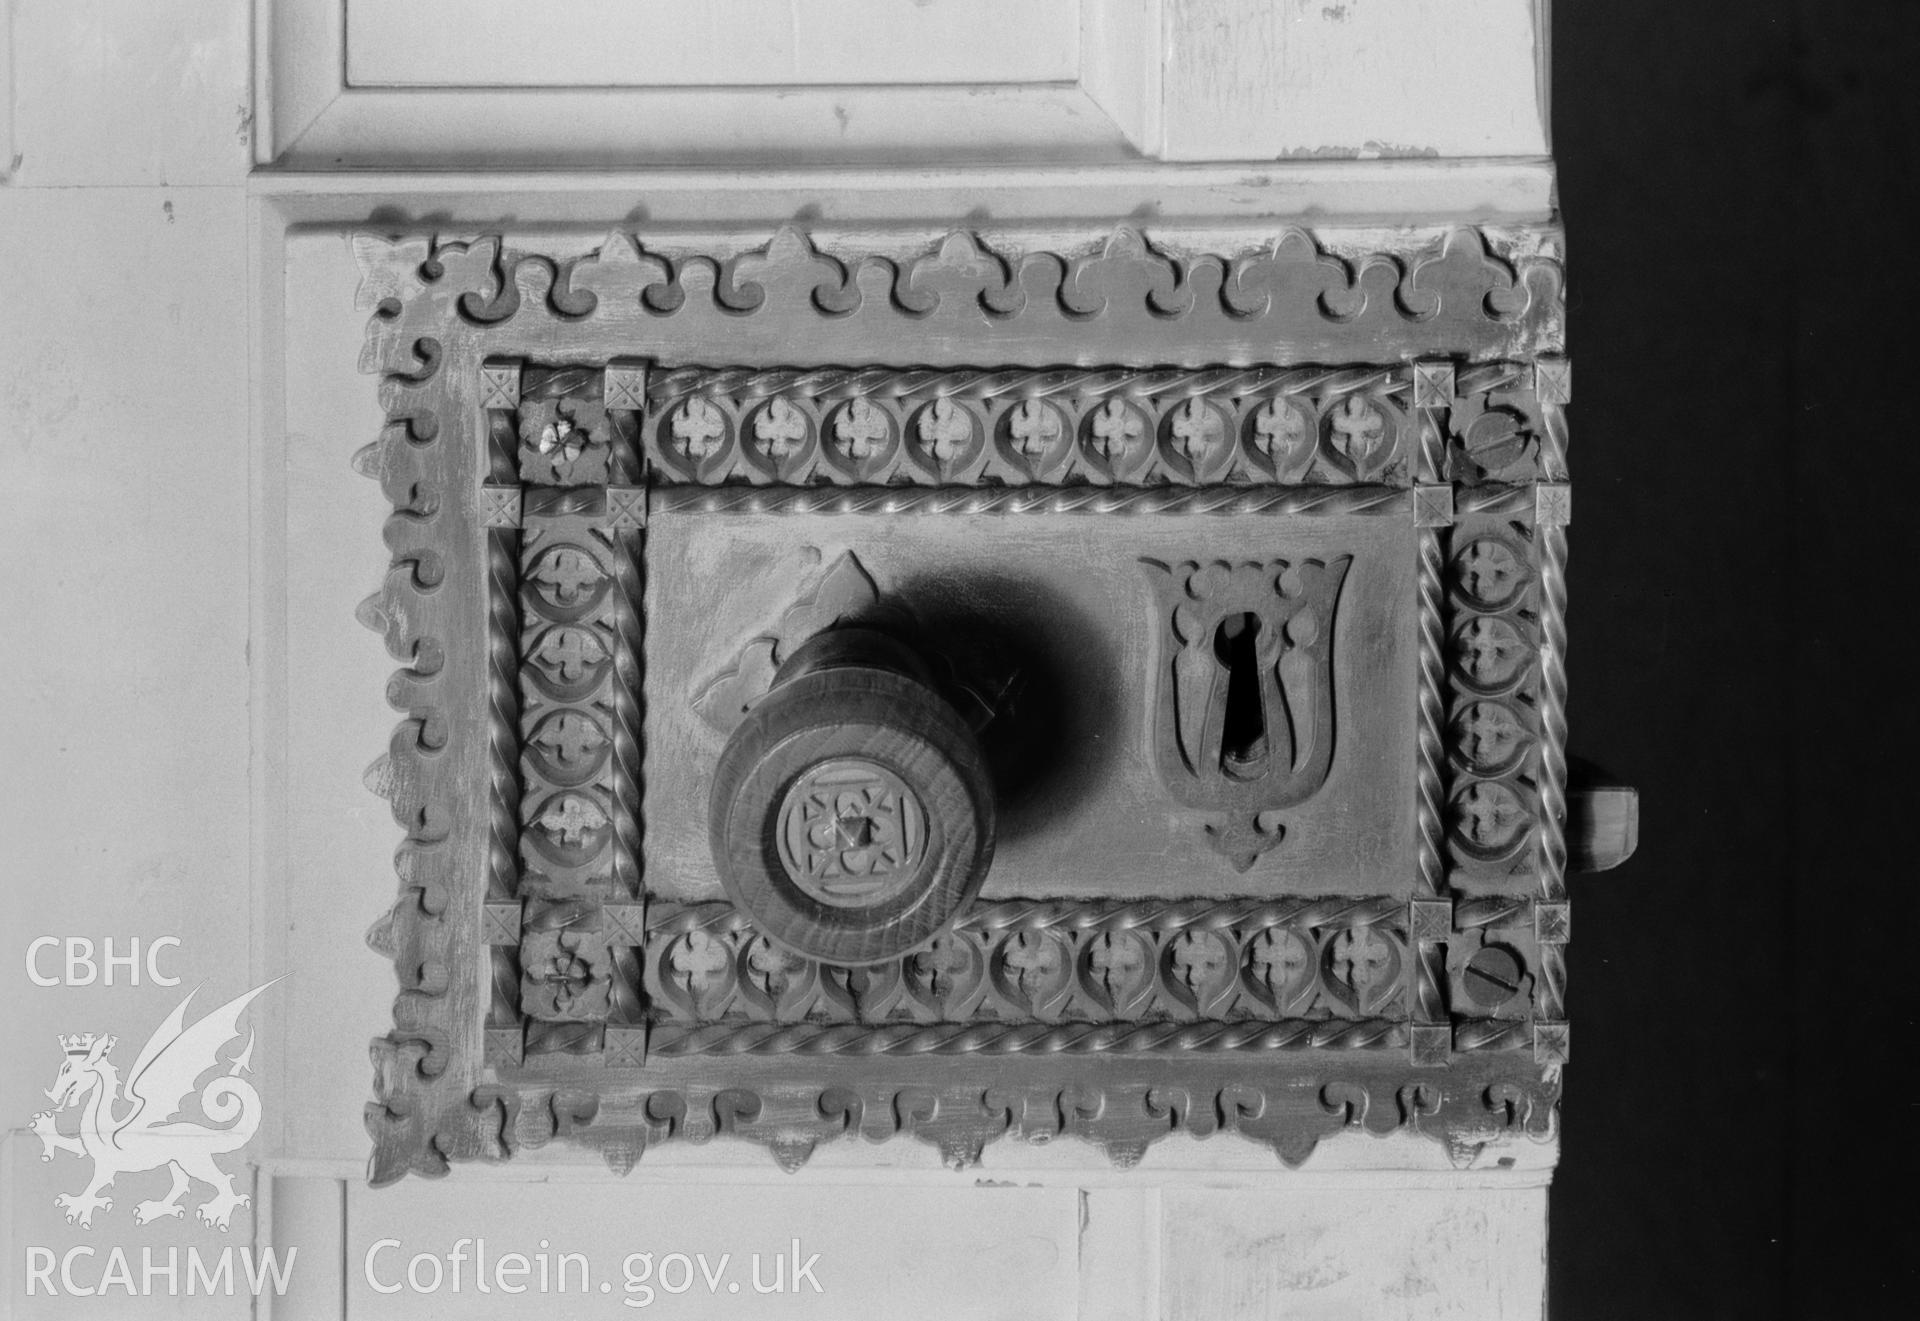 The lock on the drawing room door at Treberfedd House.